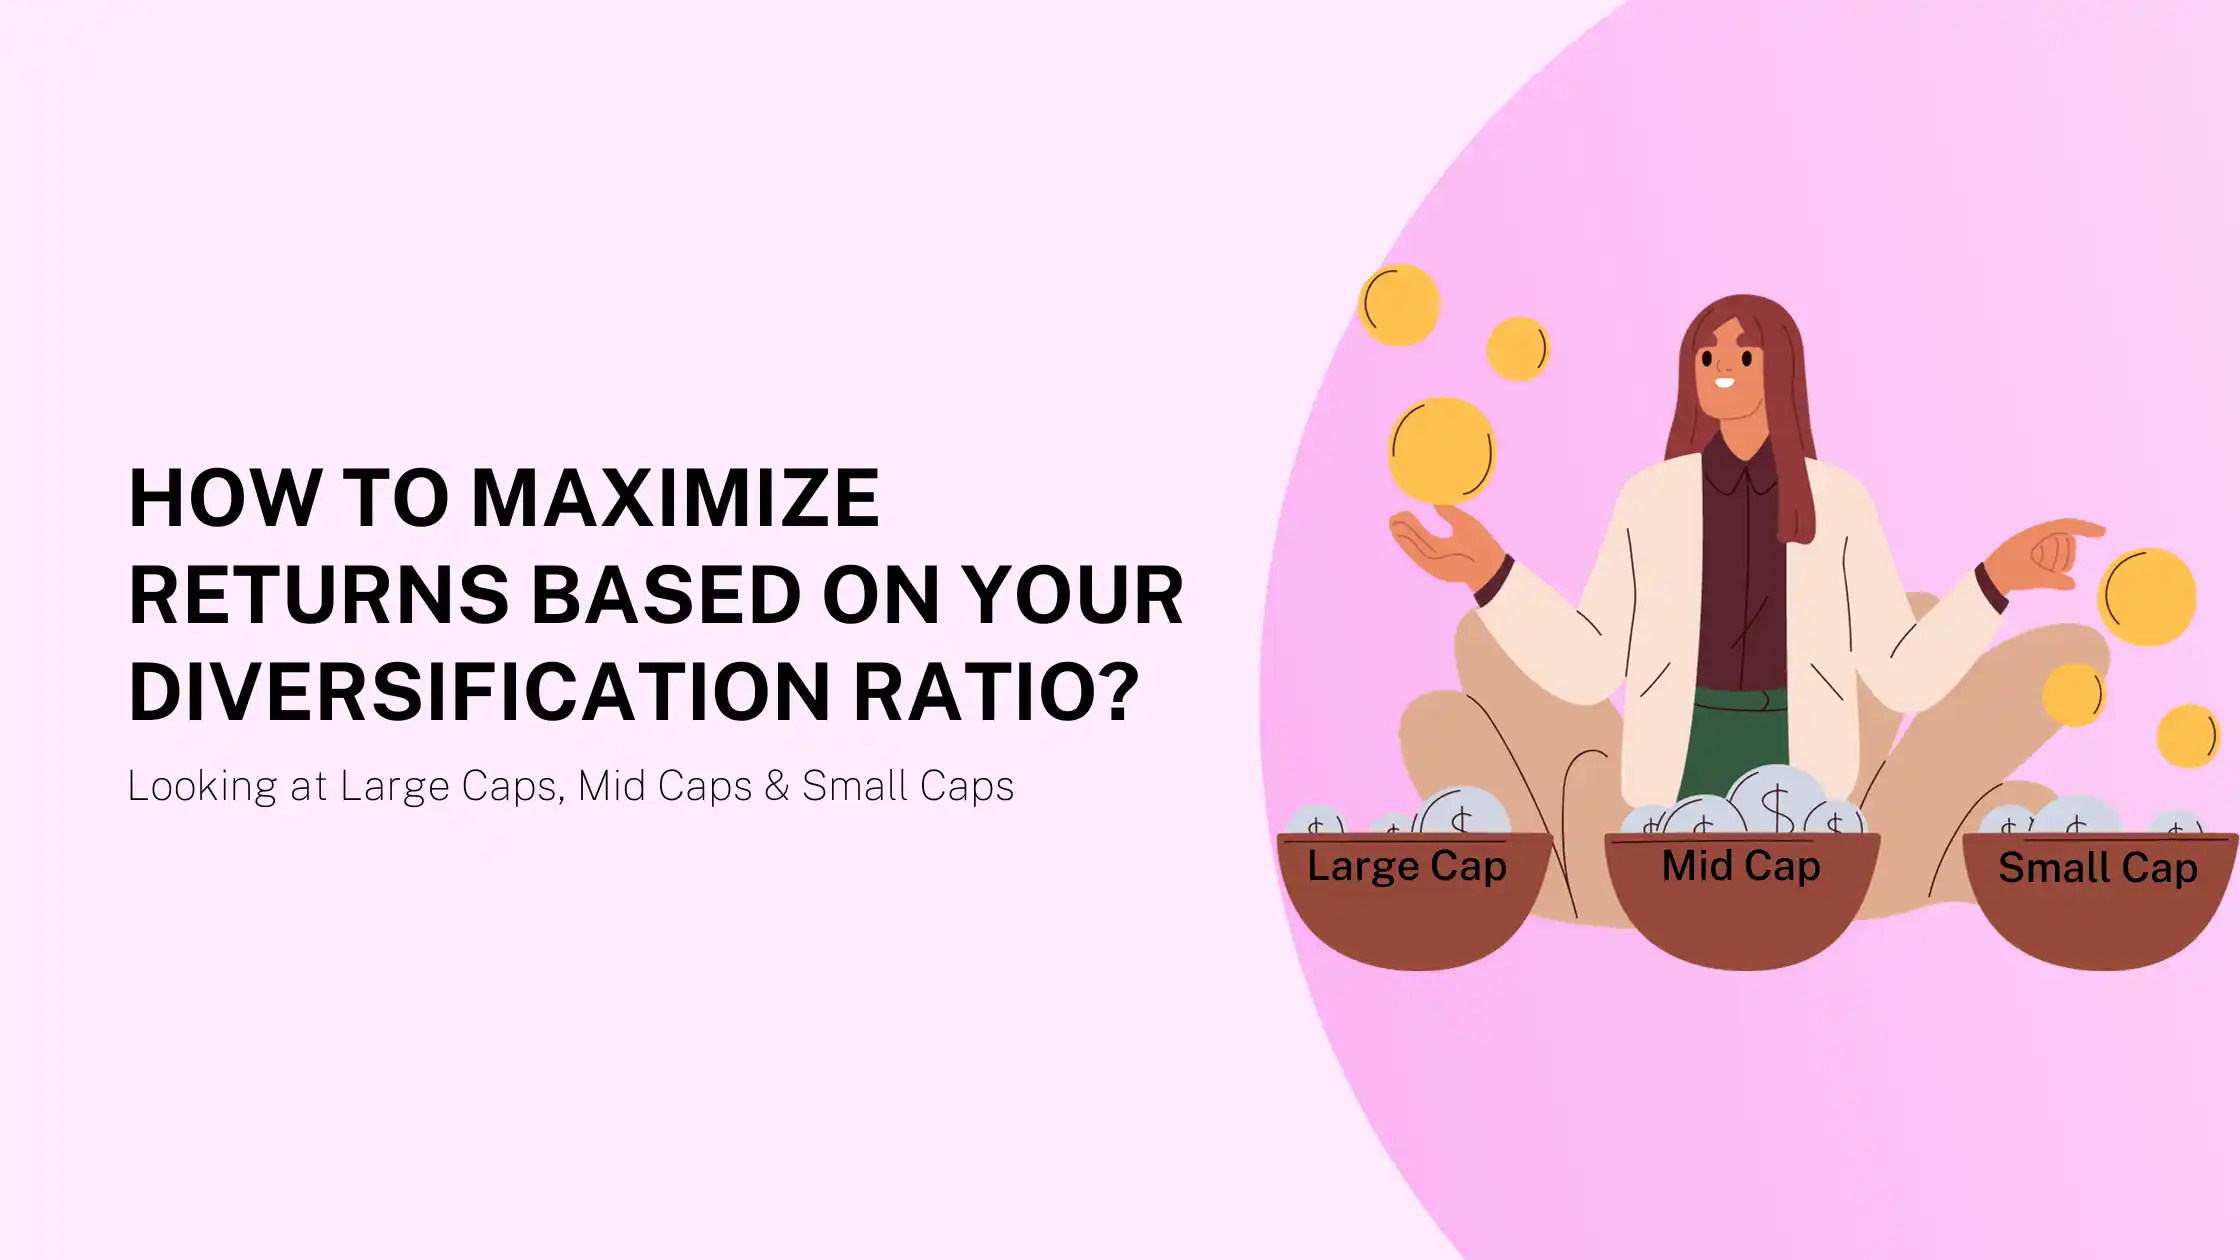 How To Maximize Returns Based On Your Diversification Ratio?